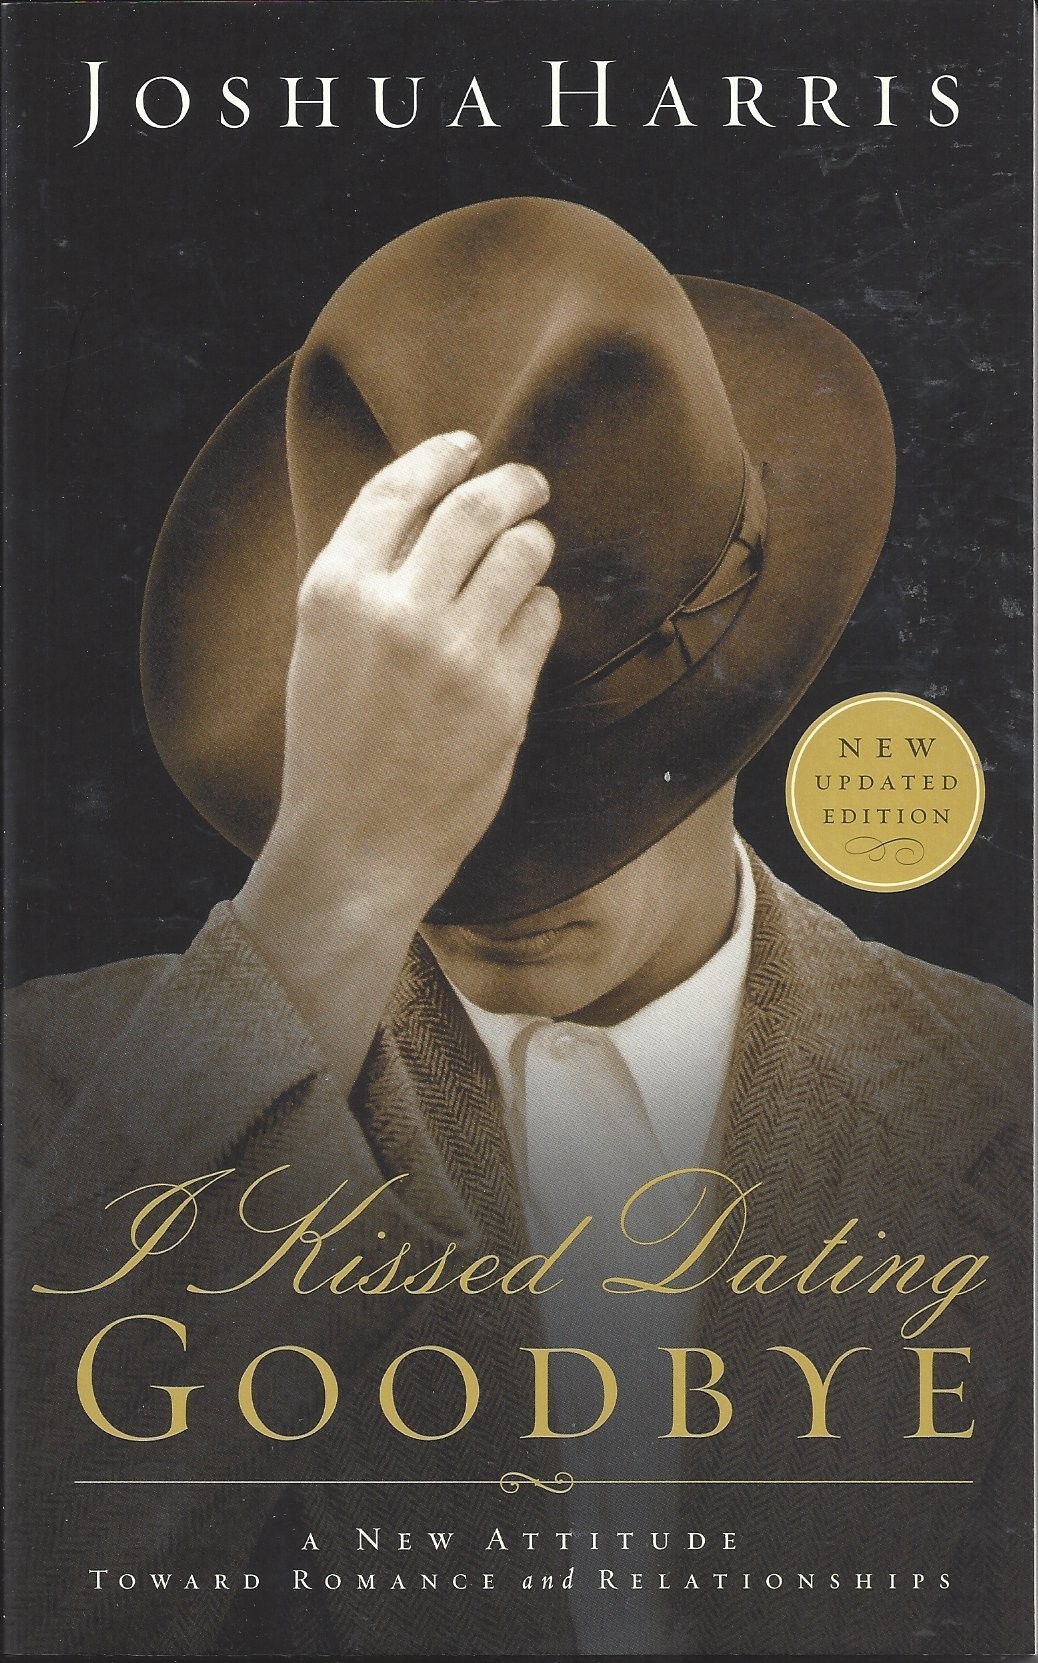 I Kissed Dating Goodbye   A New Attitude Toward Romance And Relationships (1997)  Front